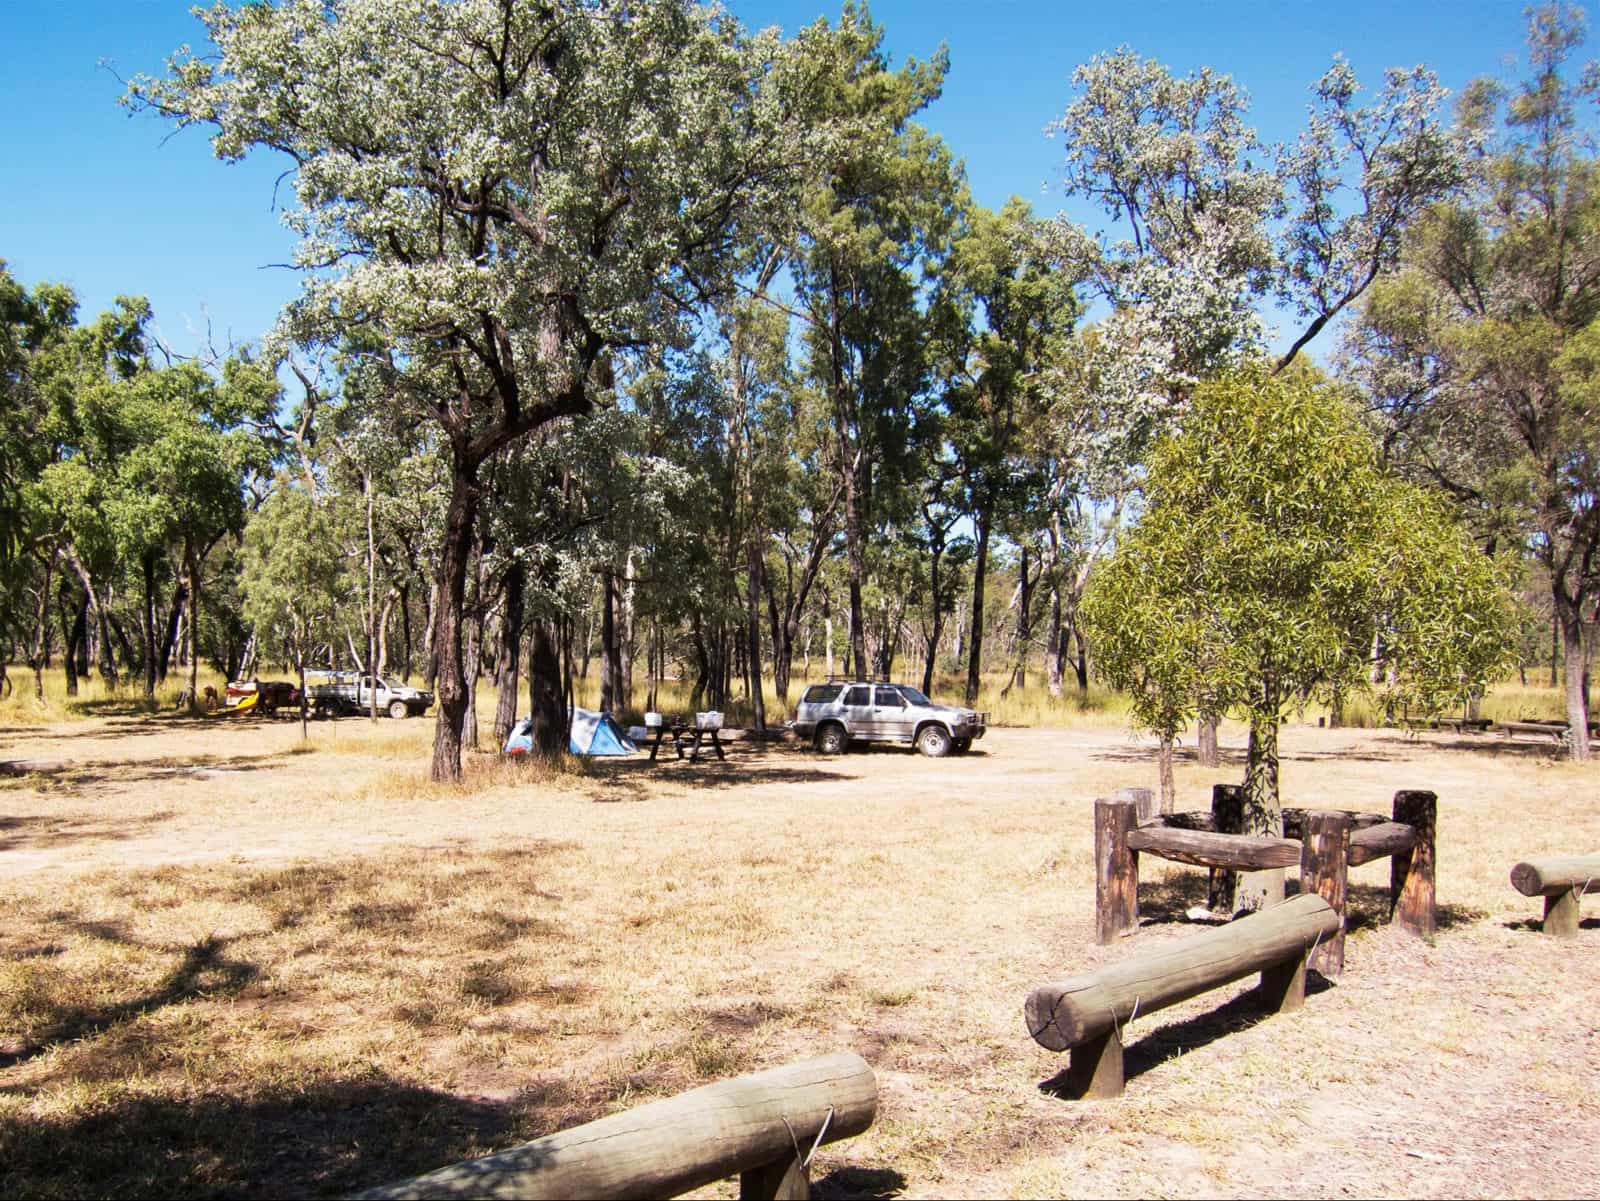 Camp and vehicle set up under trees with mown grass in foreground.